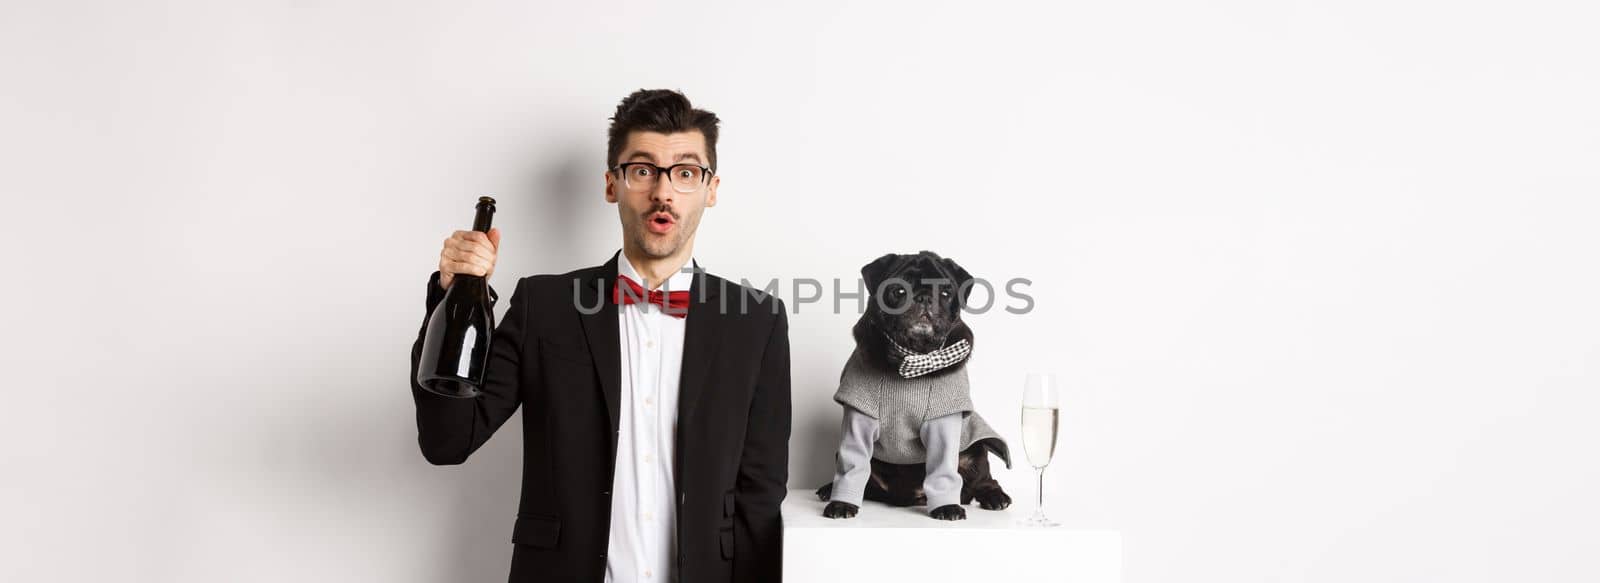 Pets, winter holidays and New Year concept. Cheerful man with cute black pug dog celebrating Christmas party, holding champagne bottle and smiling, white background.